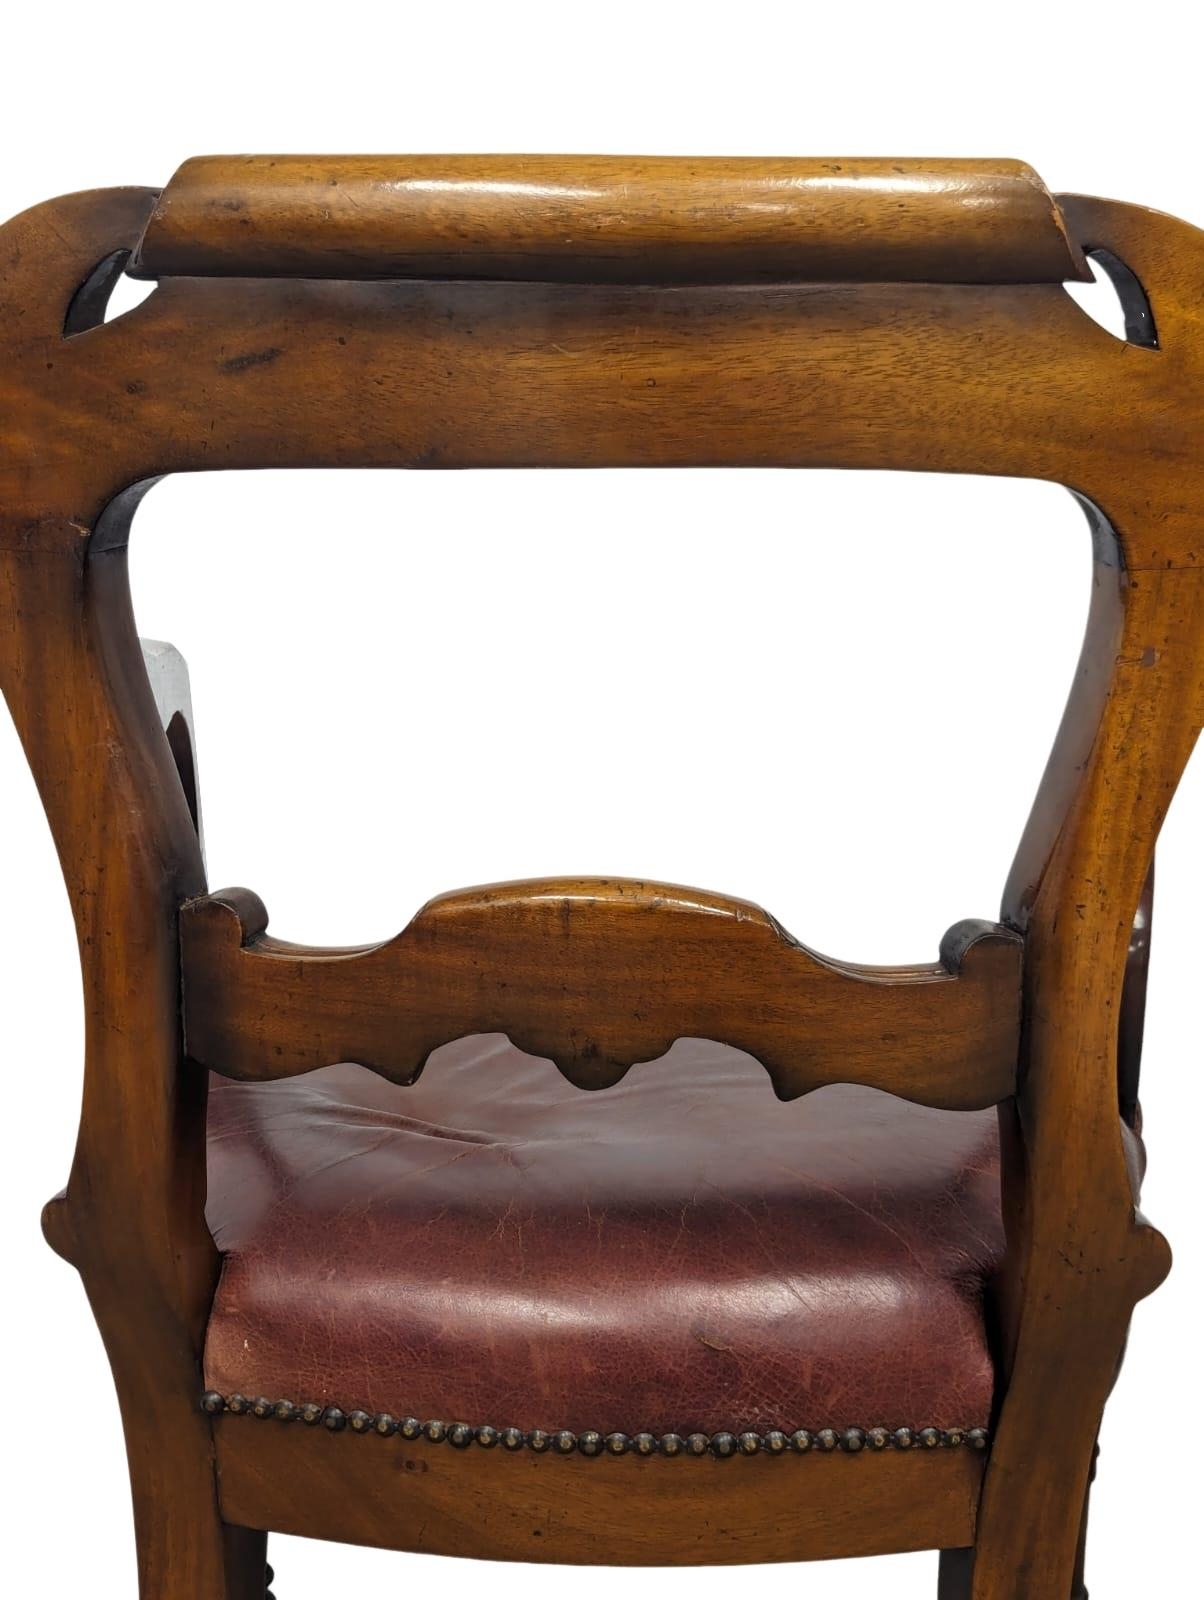 A William IV style mahogany armchair with scroll arms and leather seat - Image 2 of 8